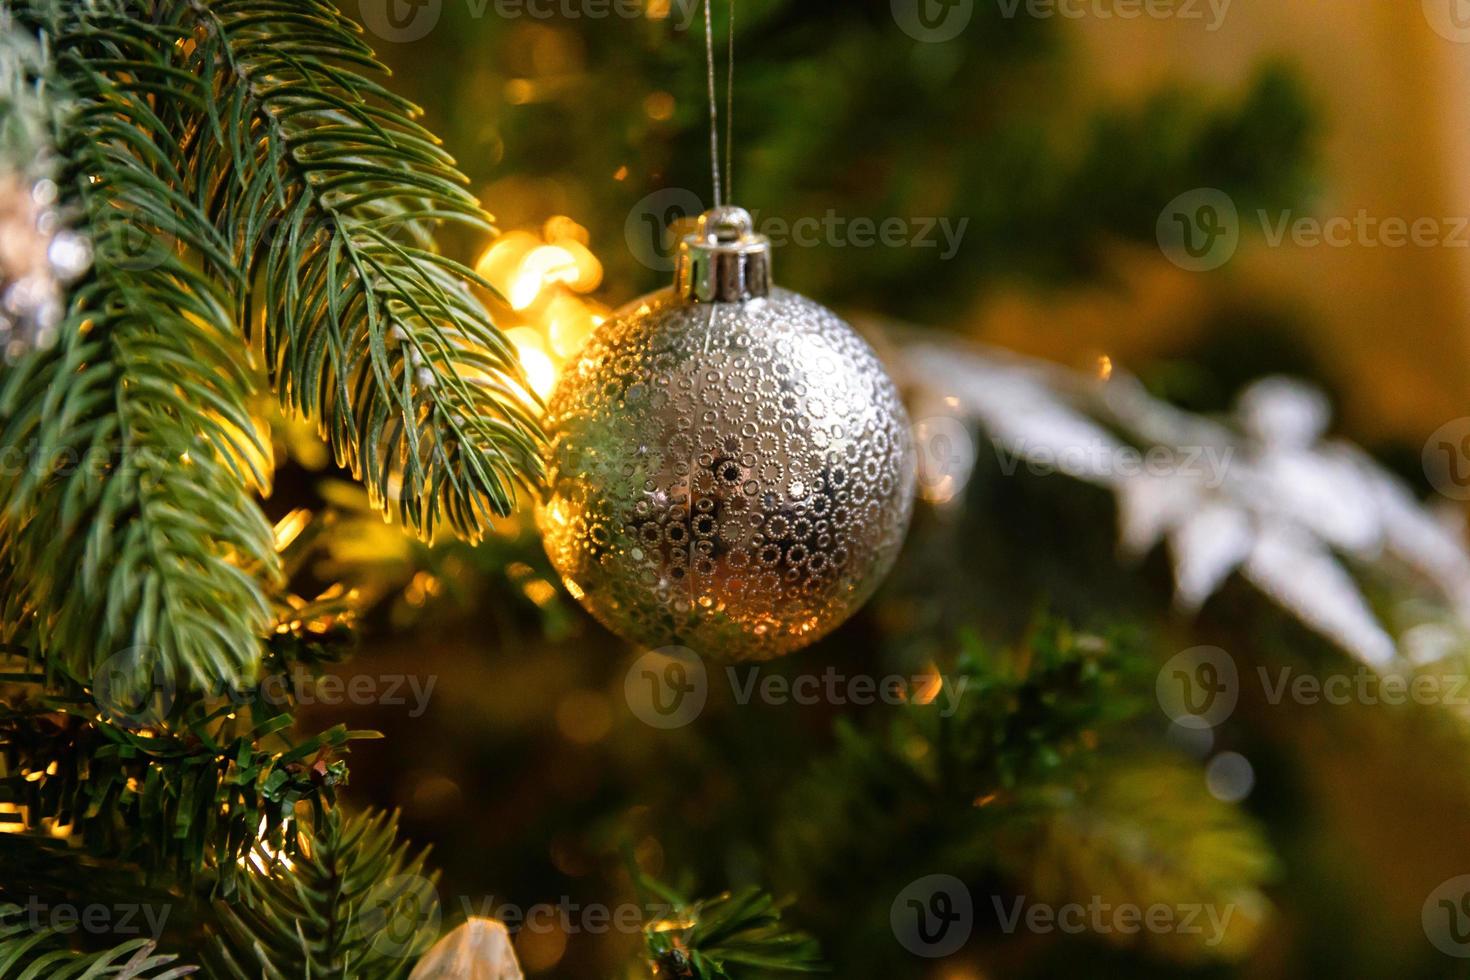 Classic Christmas decorated New year tree. Christmas tree with white and silver decorations, ornaments toy and ball. Modern classical style interior design apartment. Christmas eve at home. photo